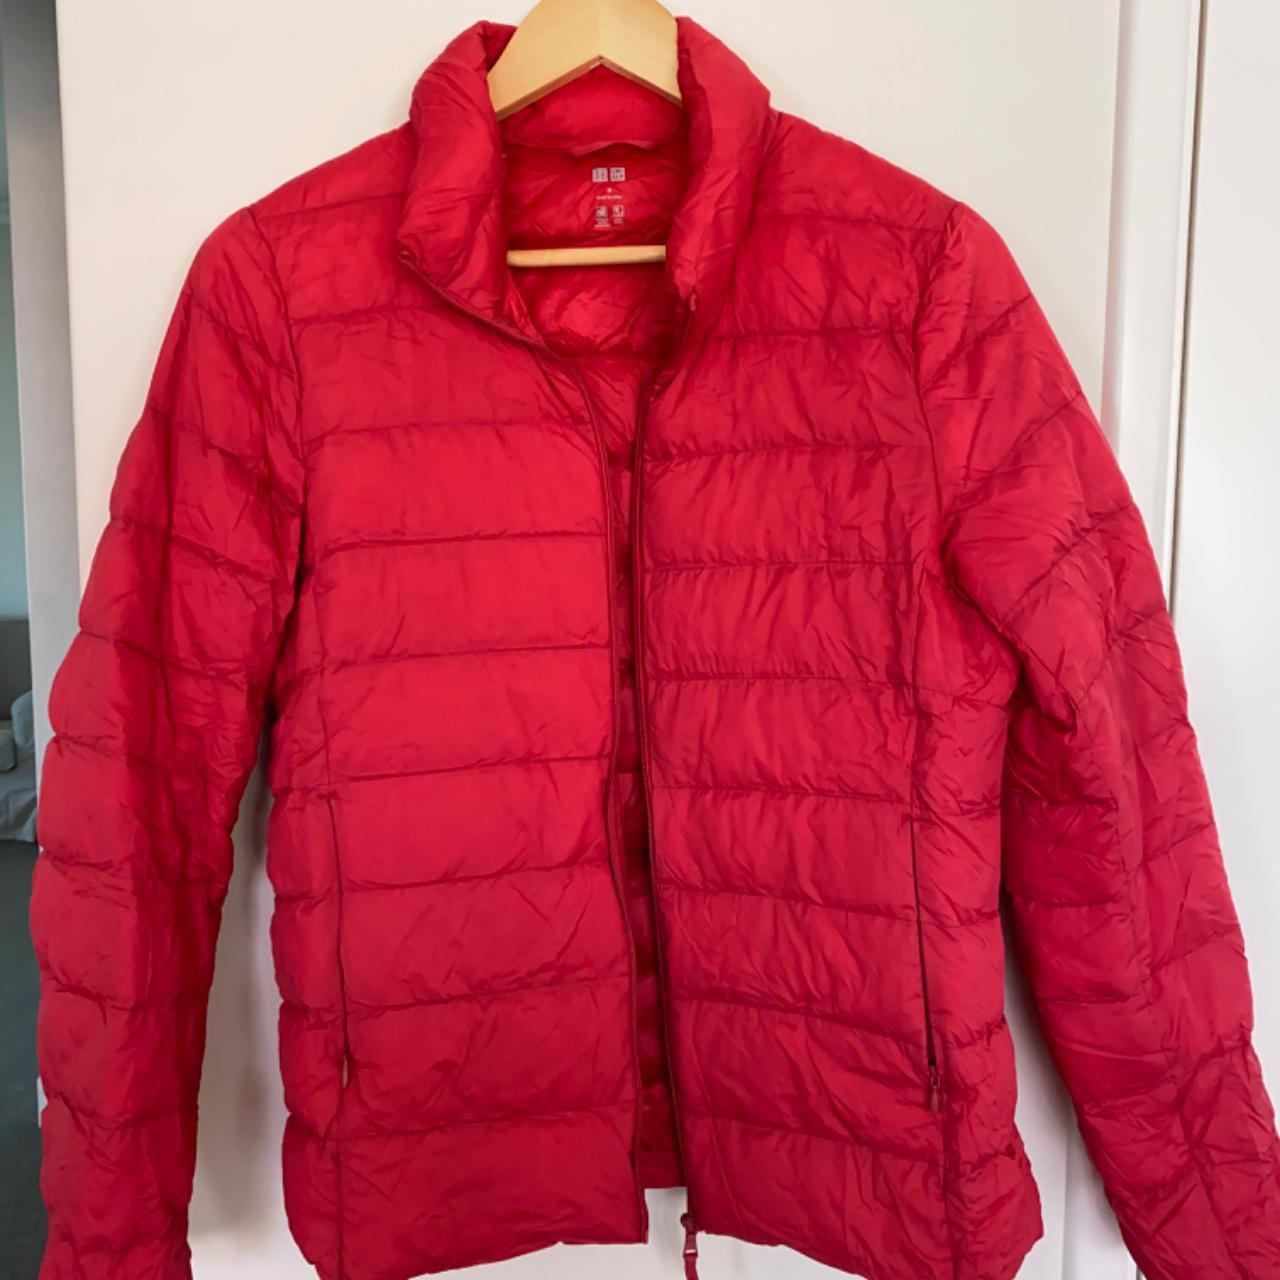 Red Puffer Jacket * Size M * Uniqlo * Rarely worn *... - Depop